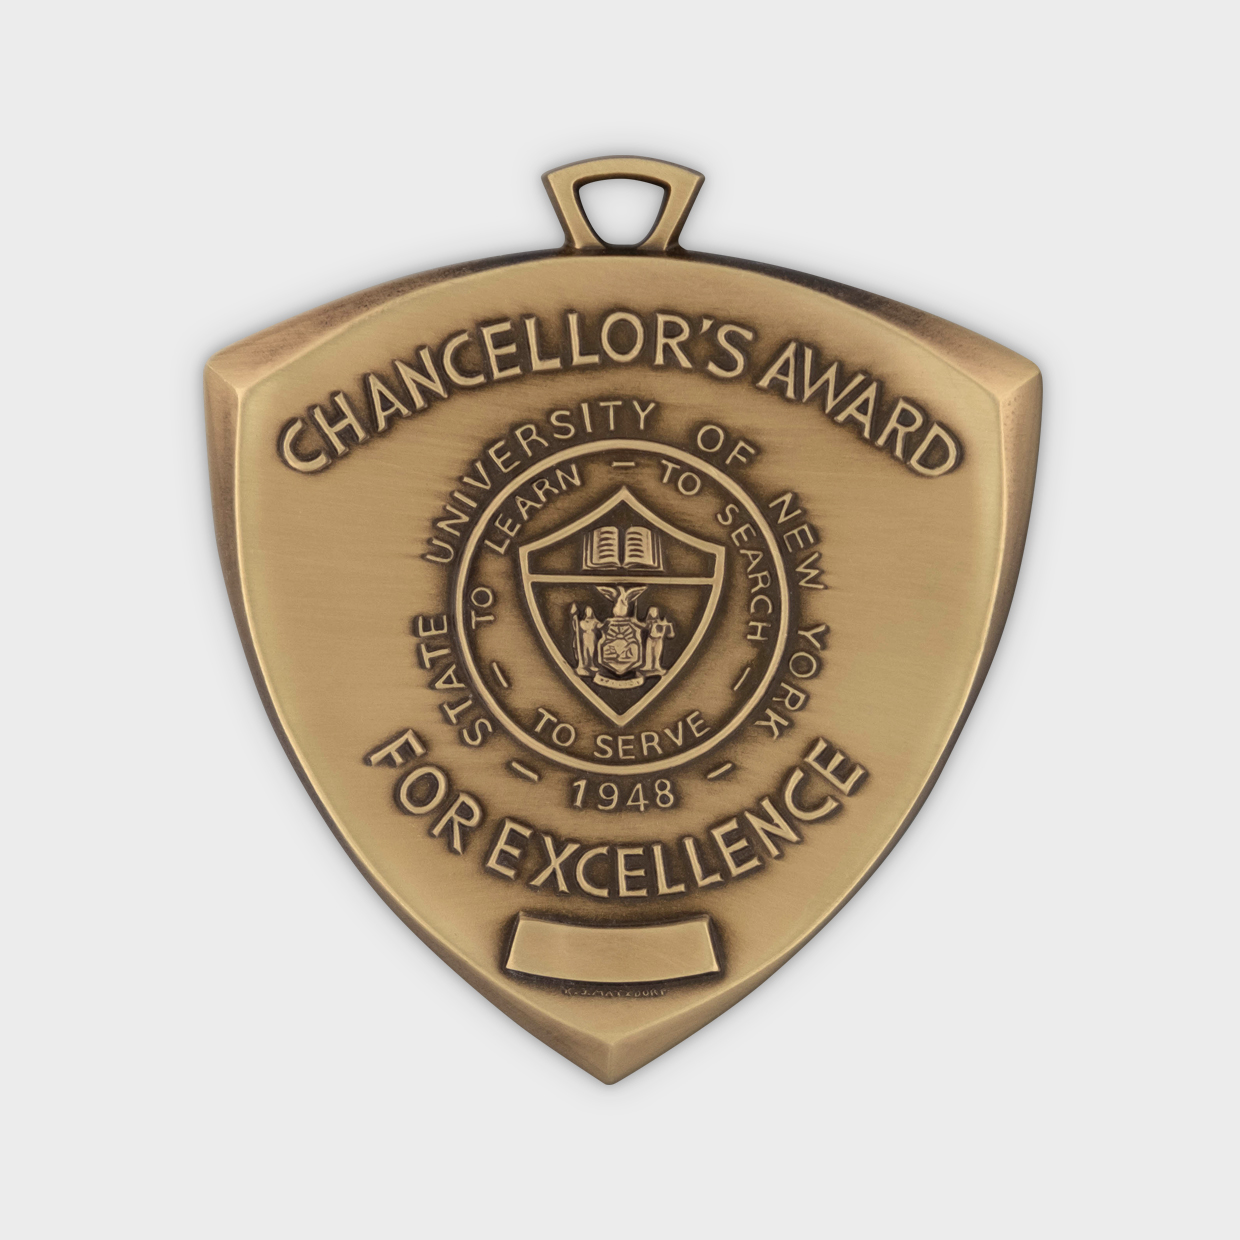 State University of New York Chancellor's Award Medal Obverse